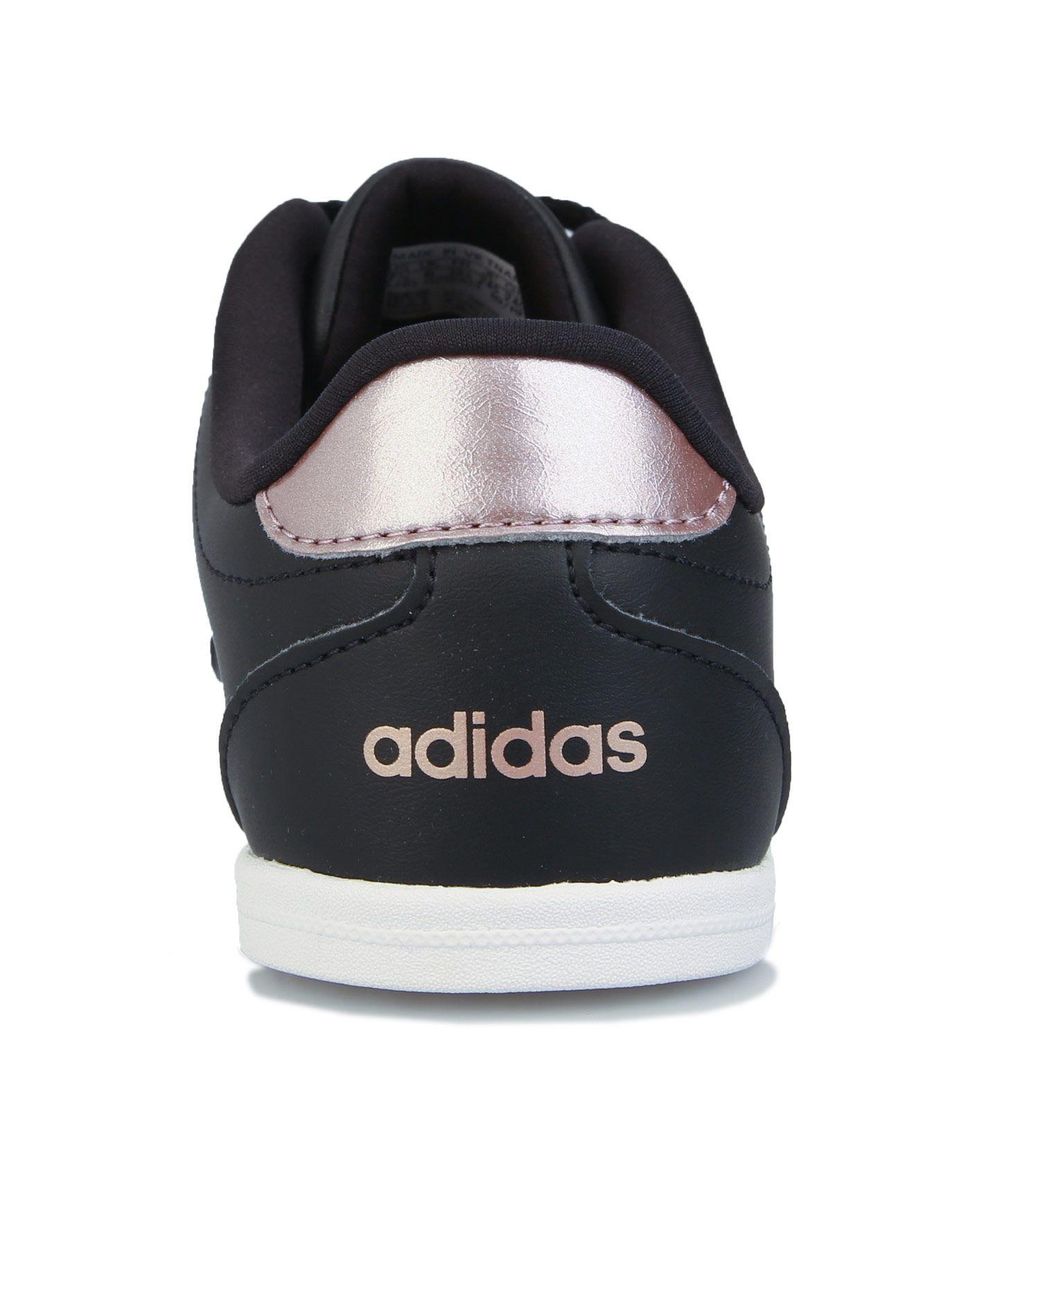 adidas Vs Coneo Qt Shoes in White (Black) | Lyst UK